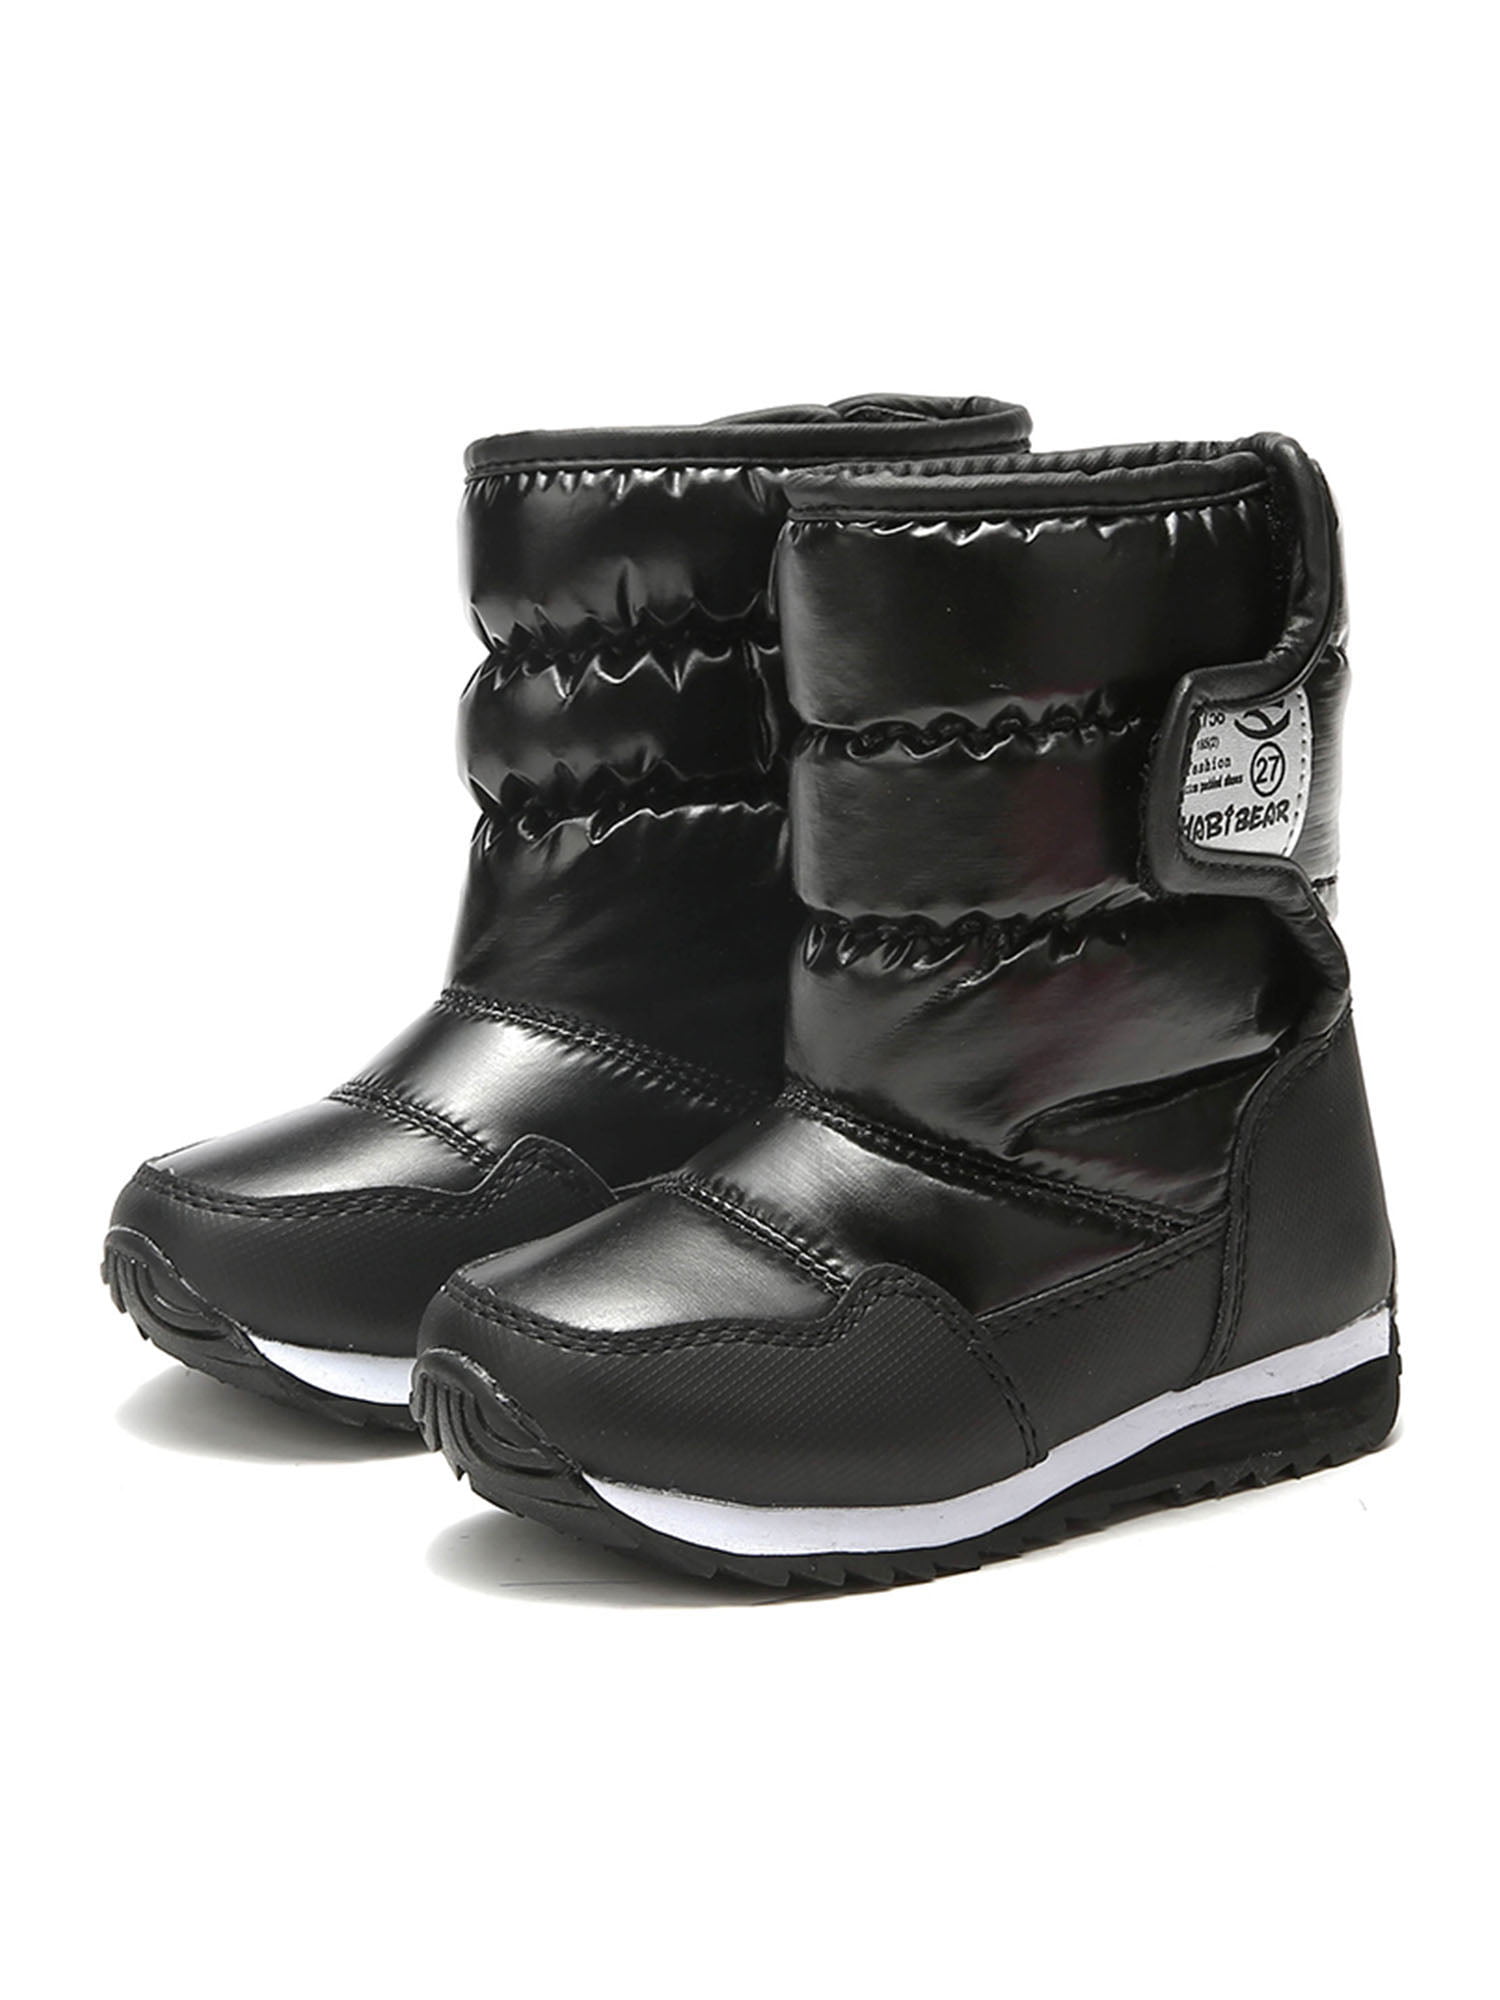 63 Sports Bonnie shoes outdoor winter boots Combine with Best Outfit